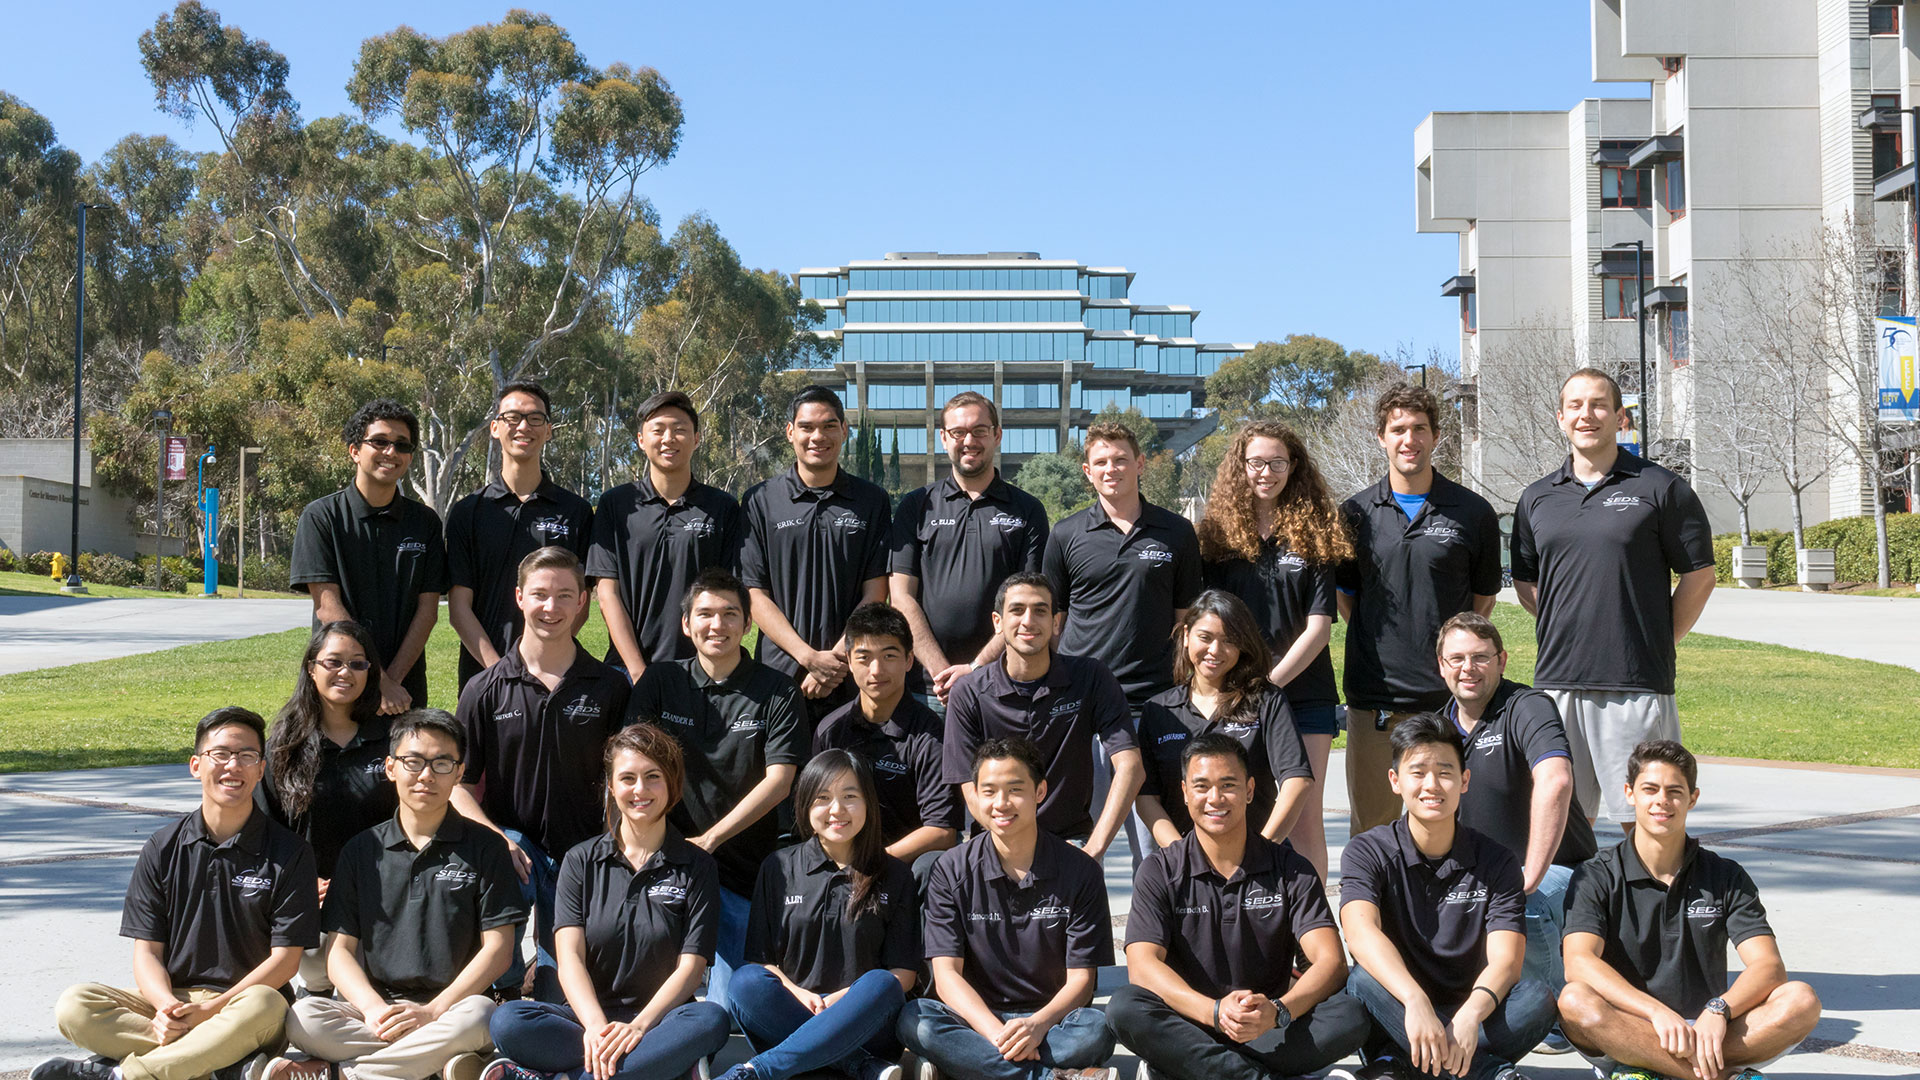 Team members from the University of California, San Diego Students for the Exploration and Development of Space (SEDS).